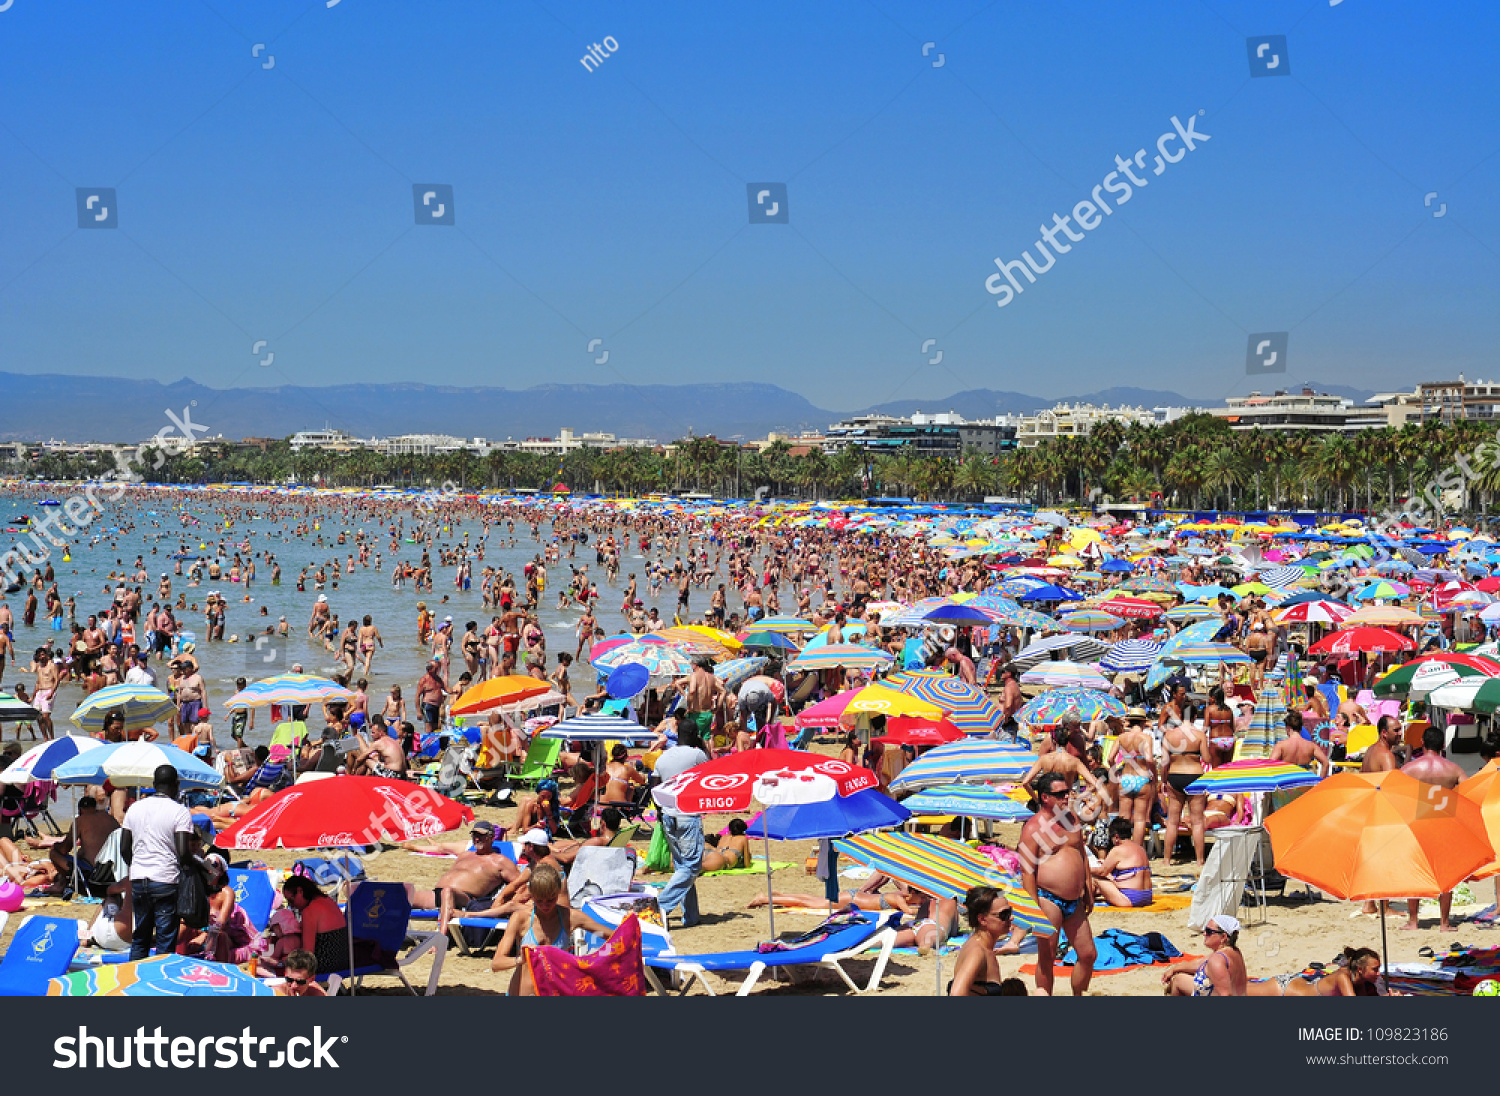 Salou Spain August 10 Vacationers Llevant Stock Photo 109823186 ...